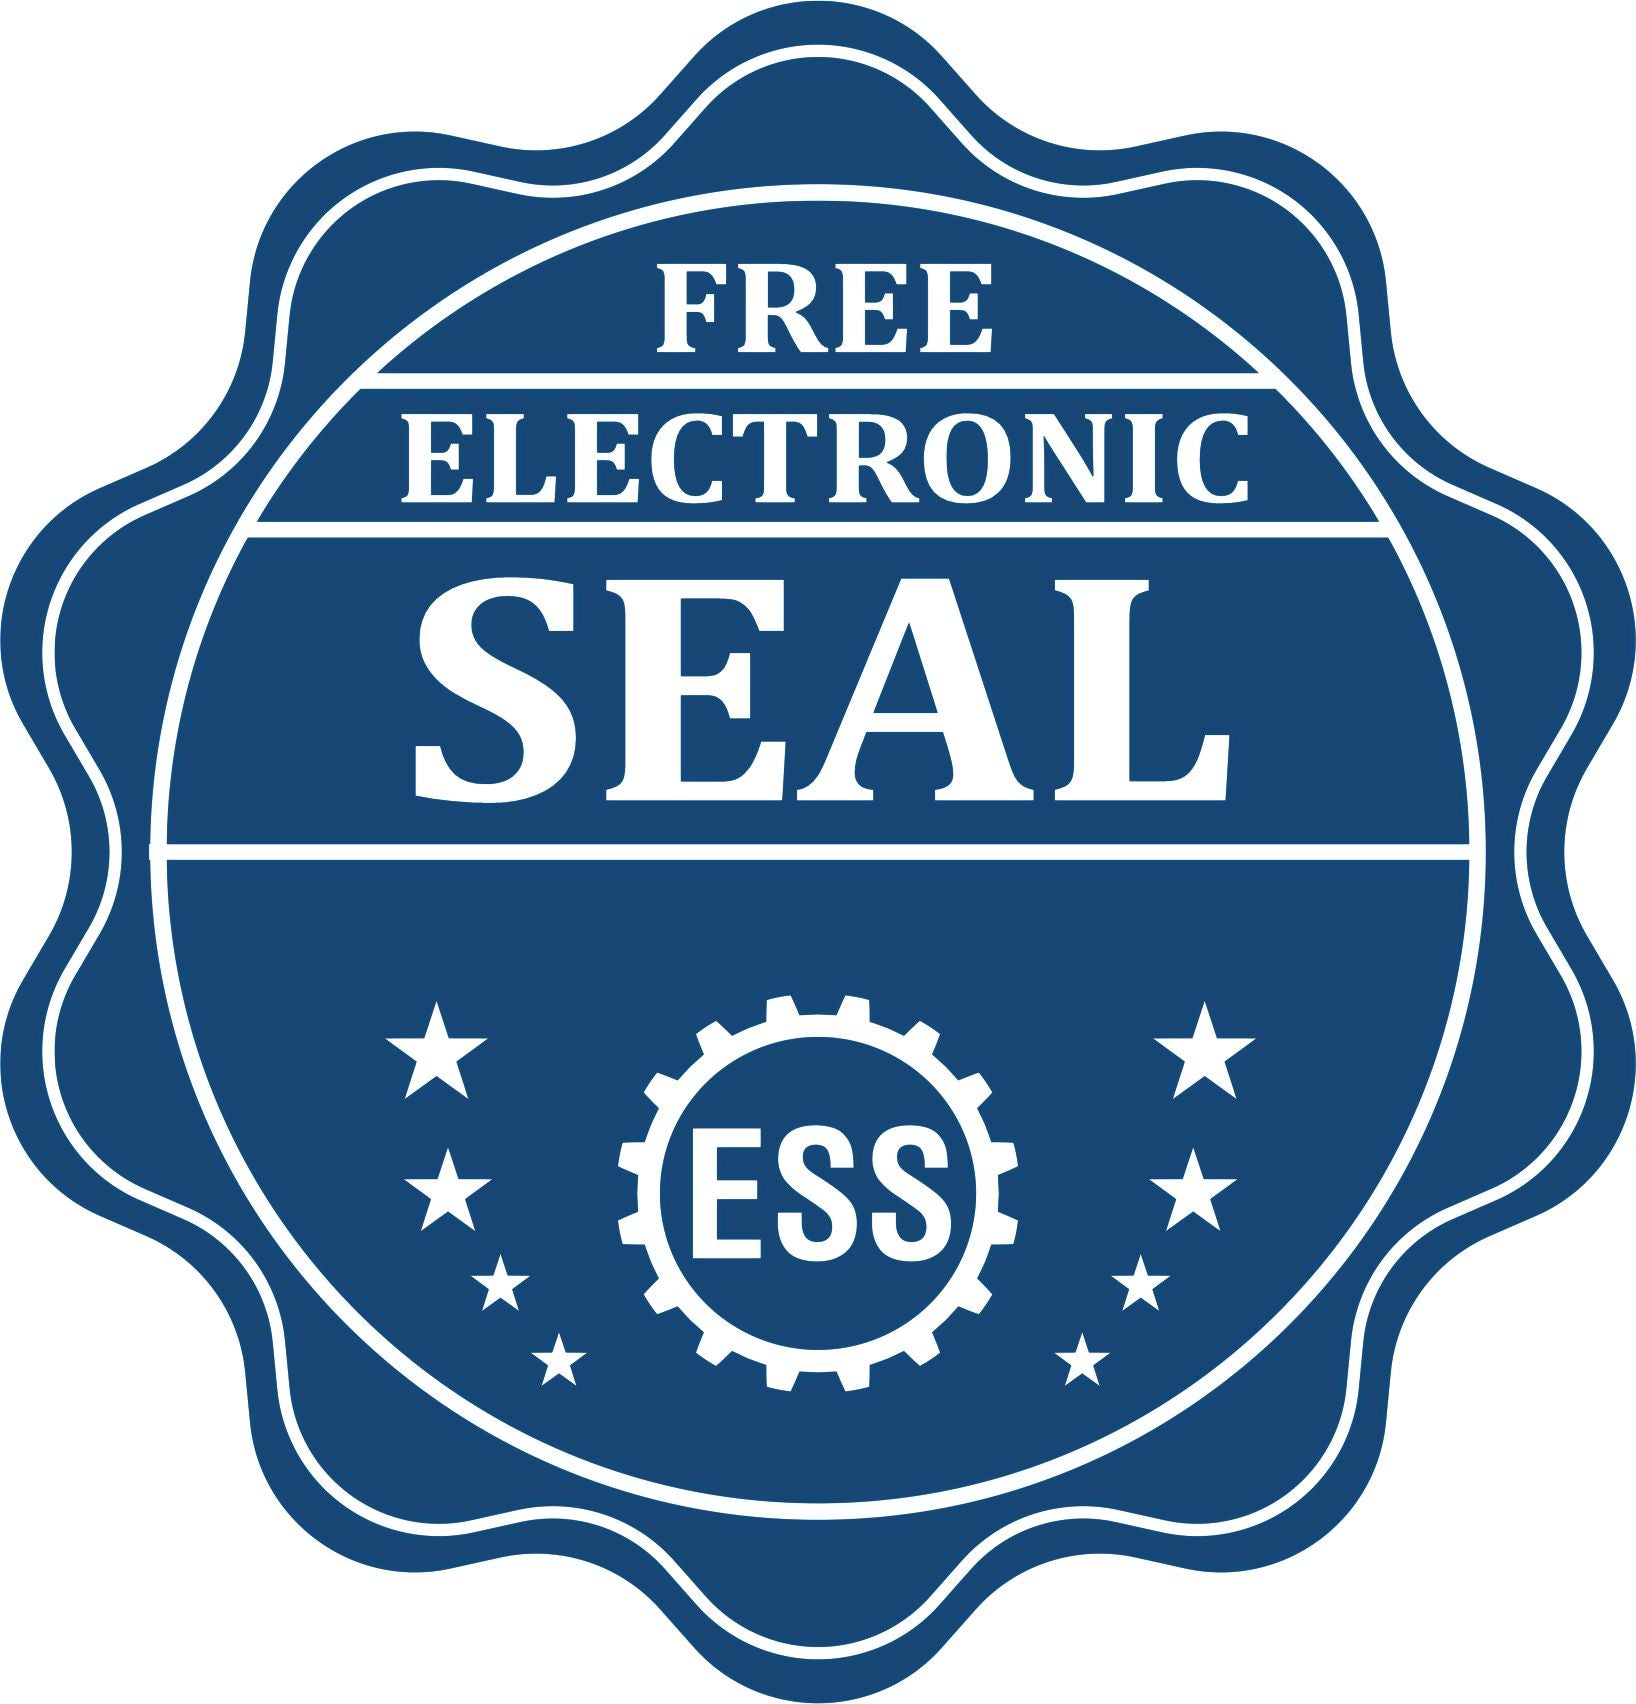 A badge showing a free electronic seal for the Heavy-Duty Alabama Rectangular Notary Stamp with stars and the ESS gear on the emblem.